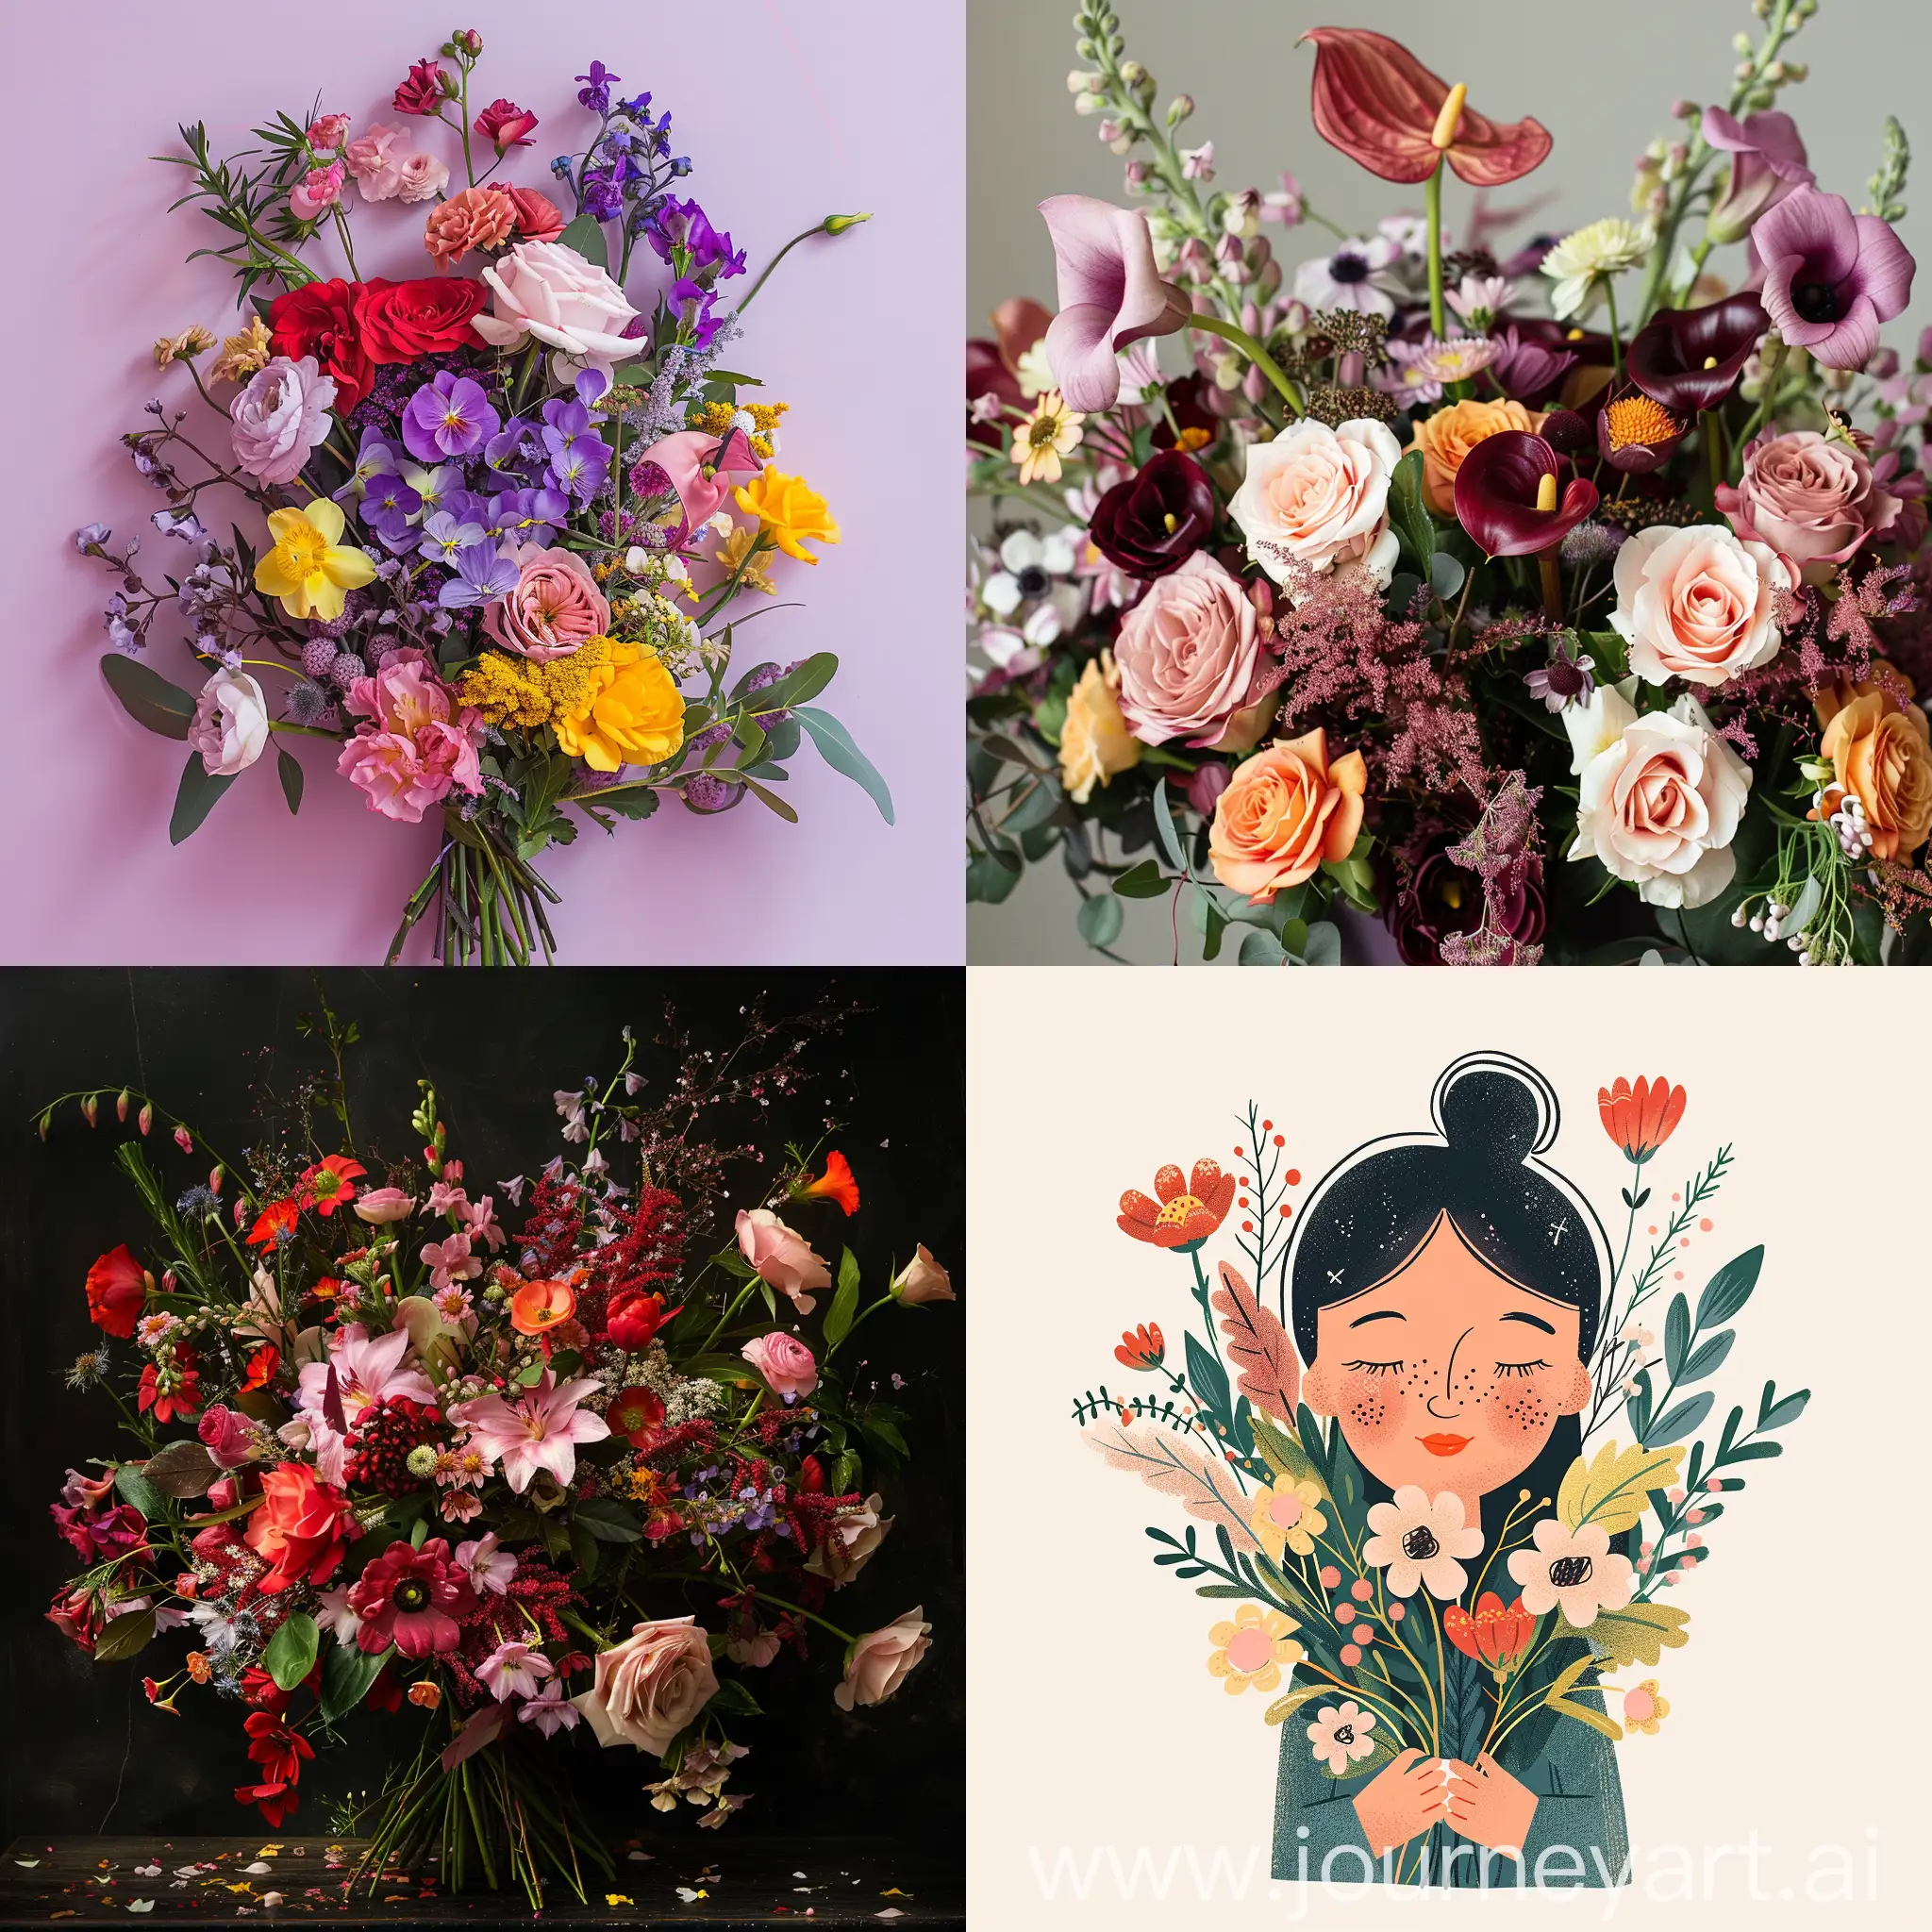 Celebrating-International-Womens-Day-with-a-Vibrant-Bouquet-of-Magical-Flowers